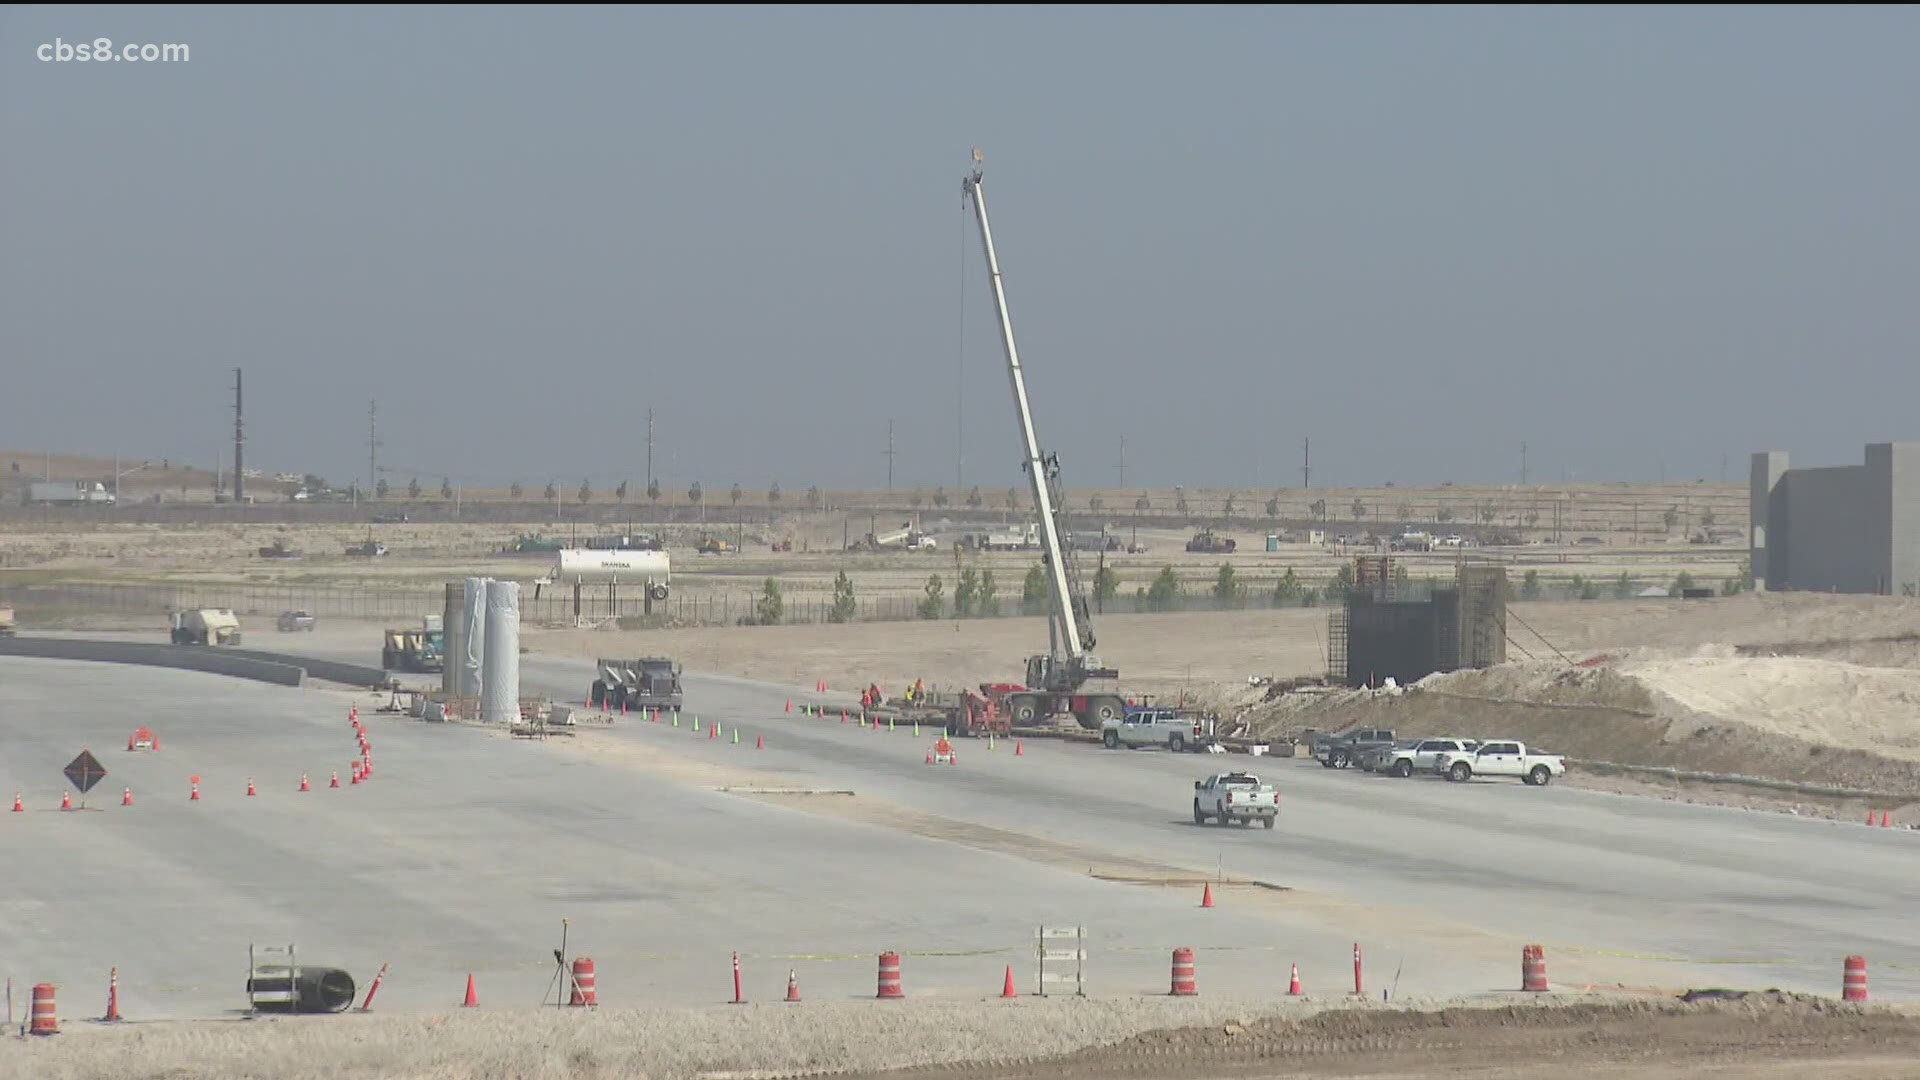 More than $500 million has been invested into the project to date, with a total of around $1 billion estimated for the facility on both sides of the border.